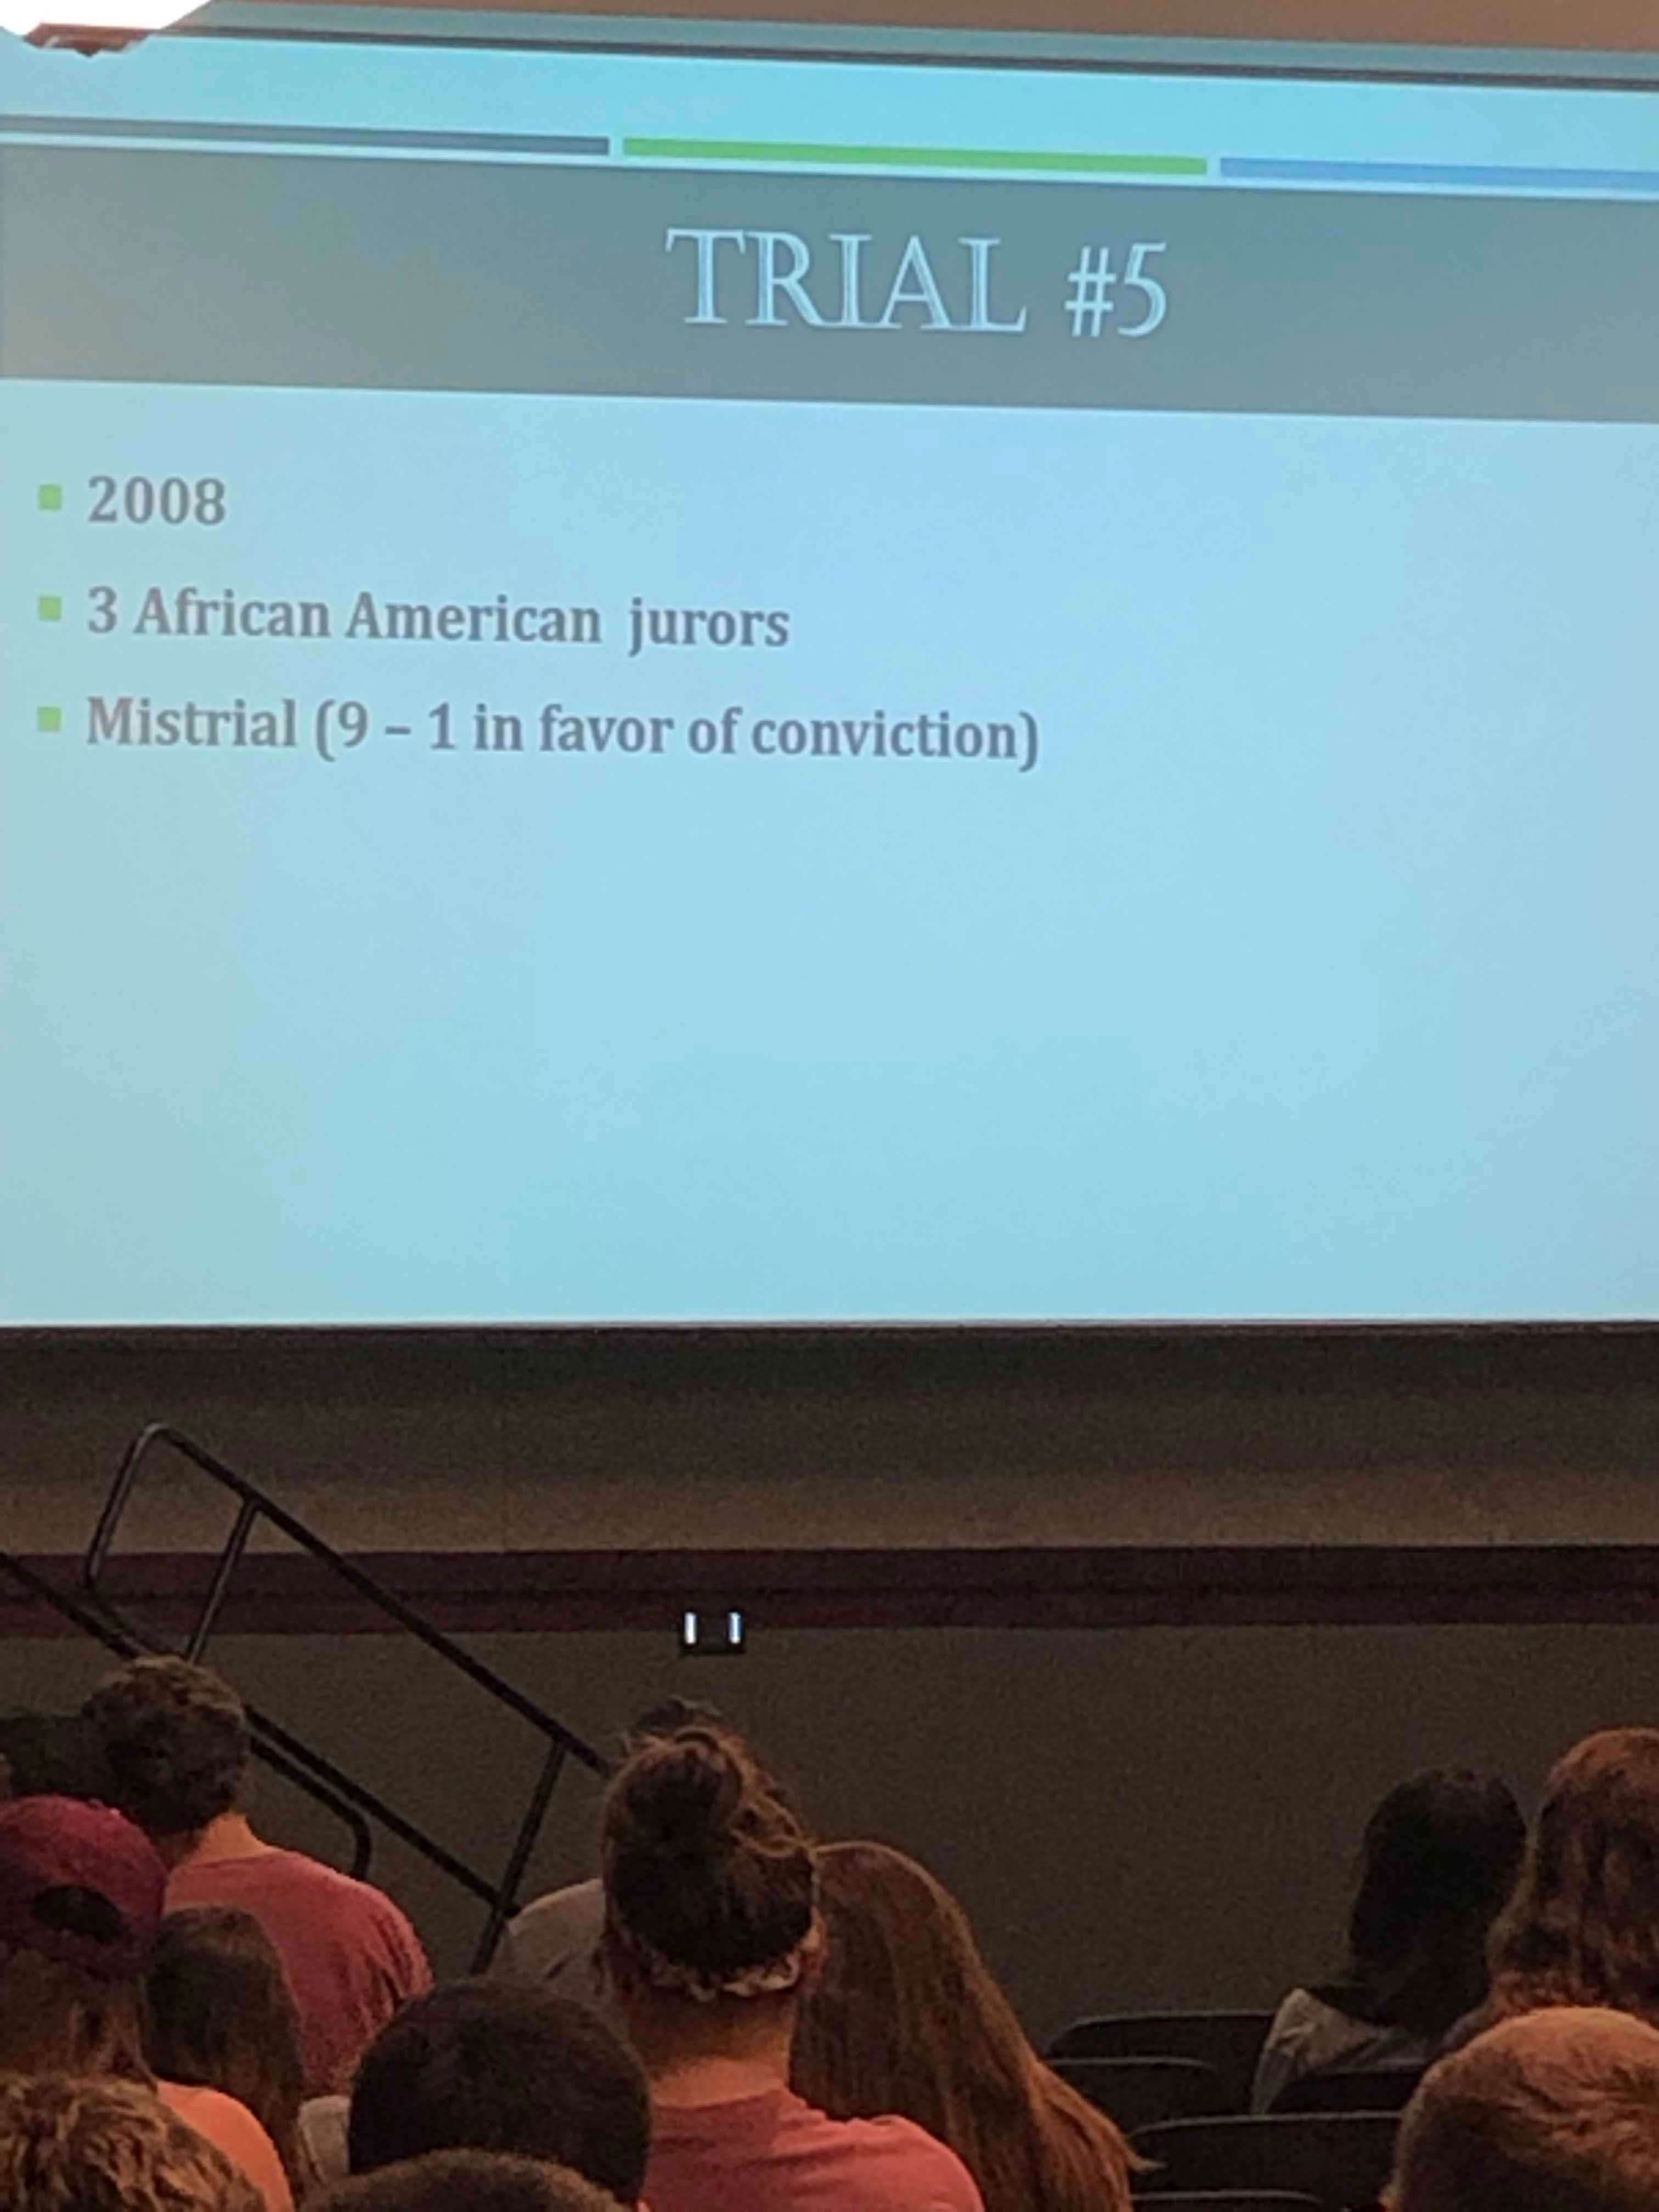 PowerPoint slide of Curtis Flowers 5th Murder Trial bullet points